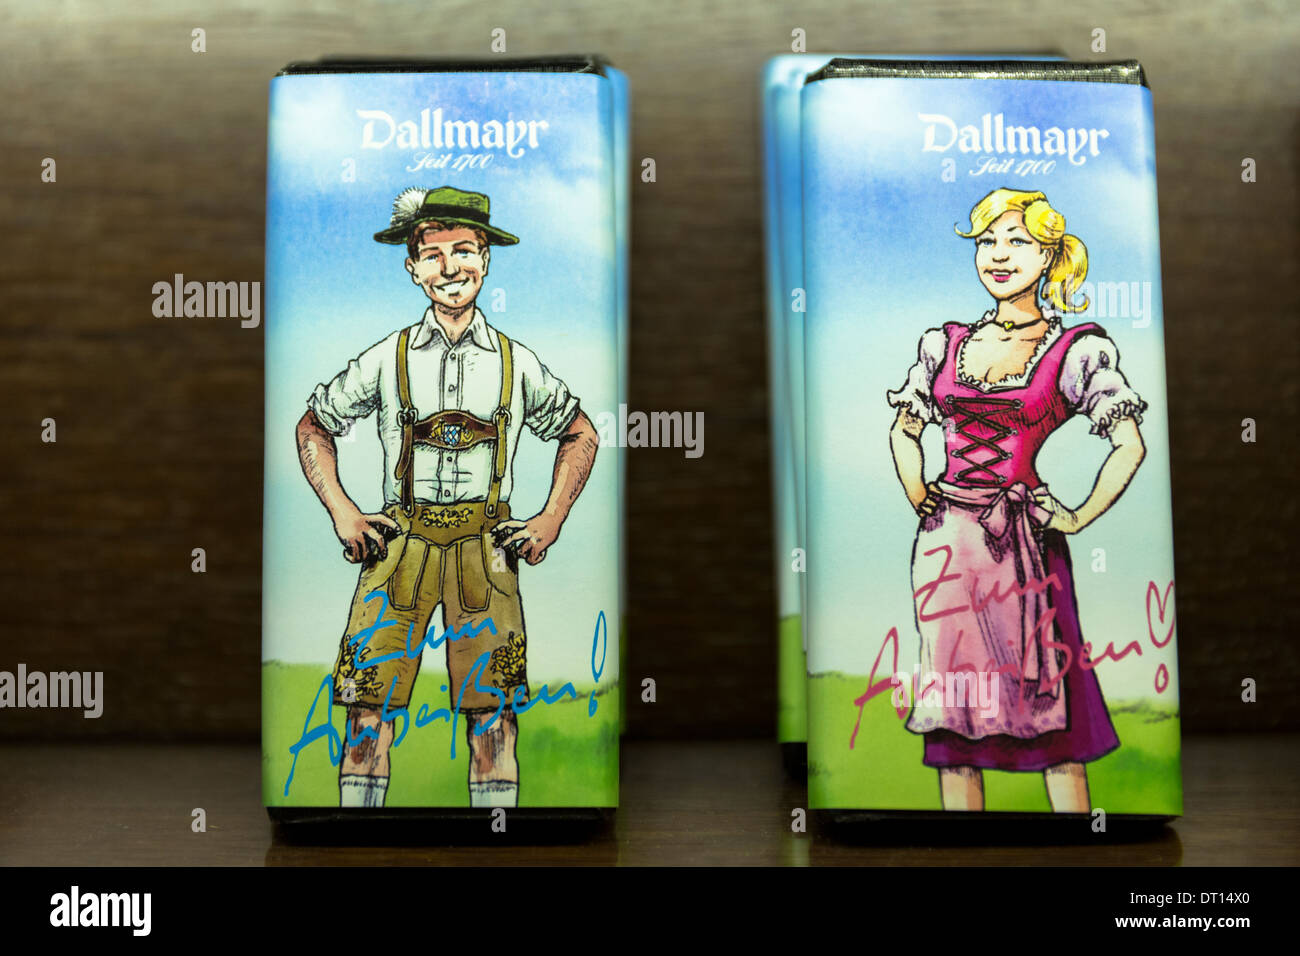 Luxury chocolate with Bavarian images on display in Gift Department at Dallmayr food store in Munich in Bavaria, Germany Stock Photo